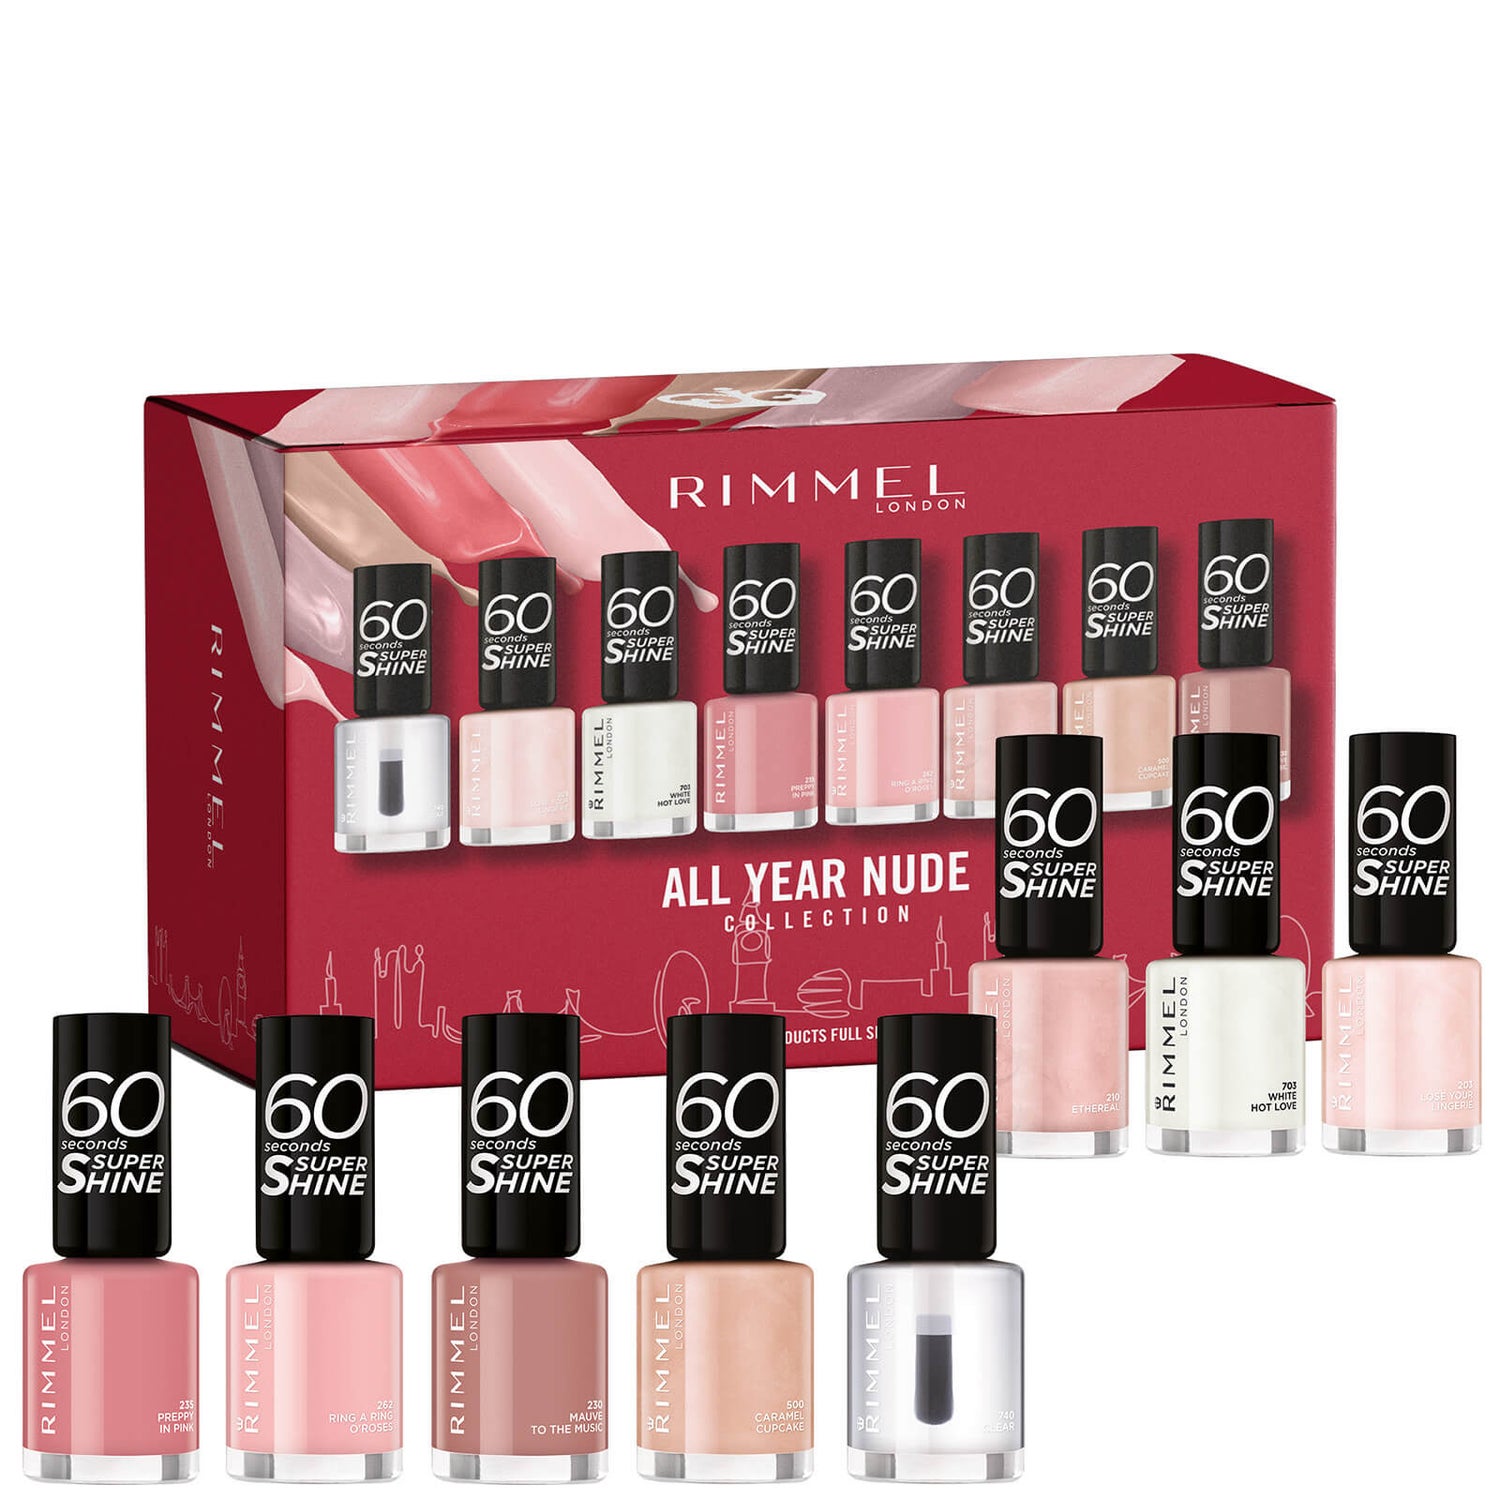 Rimmel All Year Nude Set